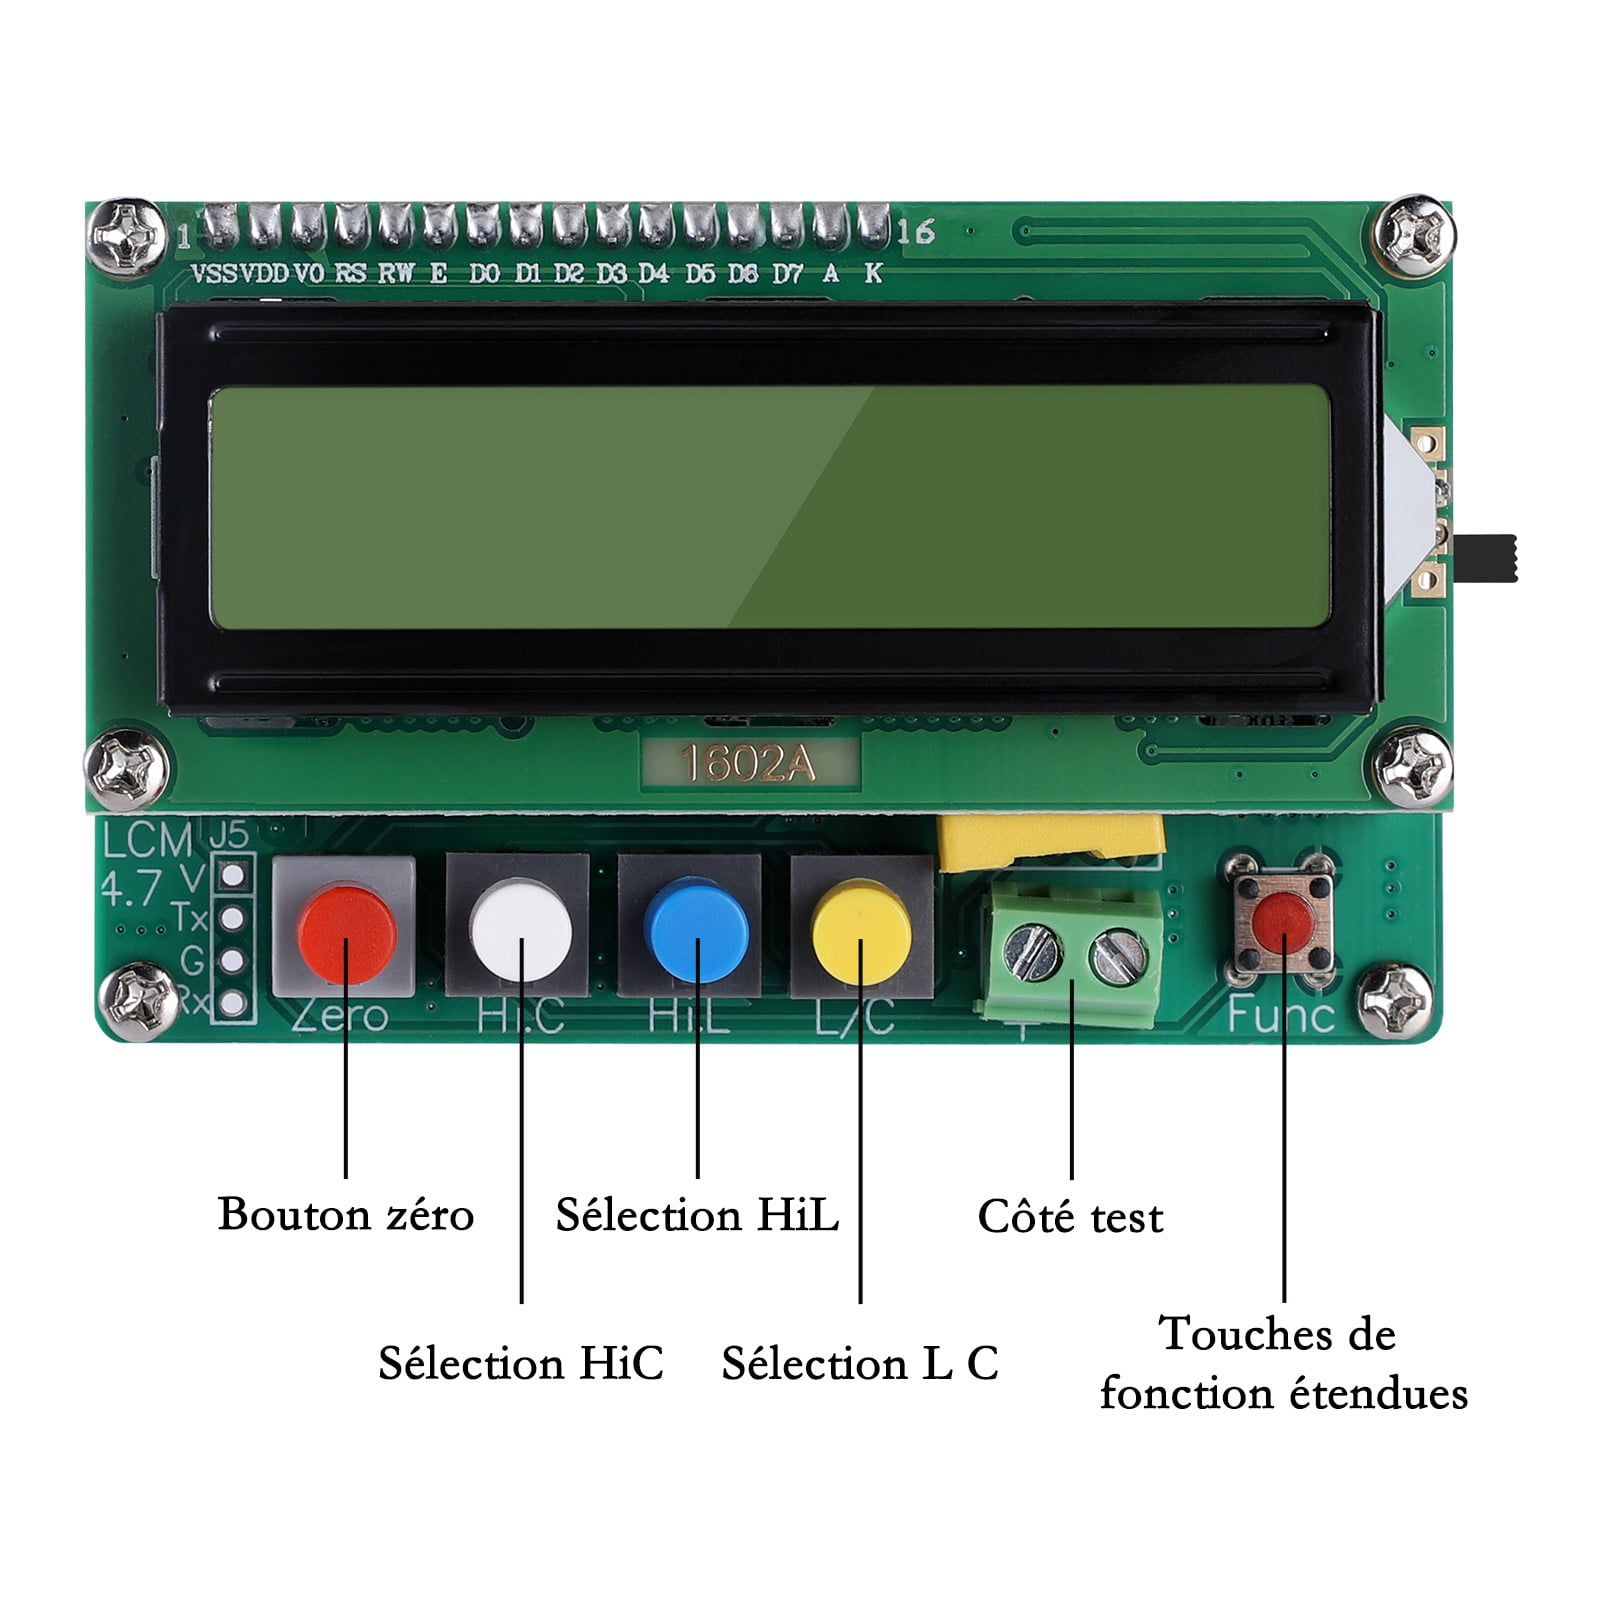 Mucjun Lc100-A Digital Lcd High Precision Inductance Capacitance L/C Meter Capacitor Test Instruments